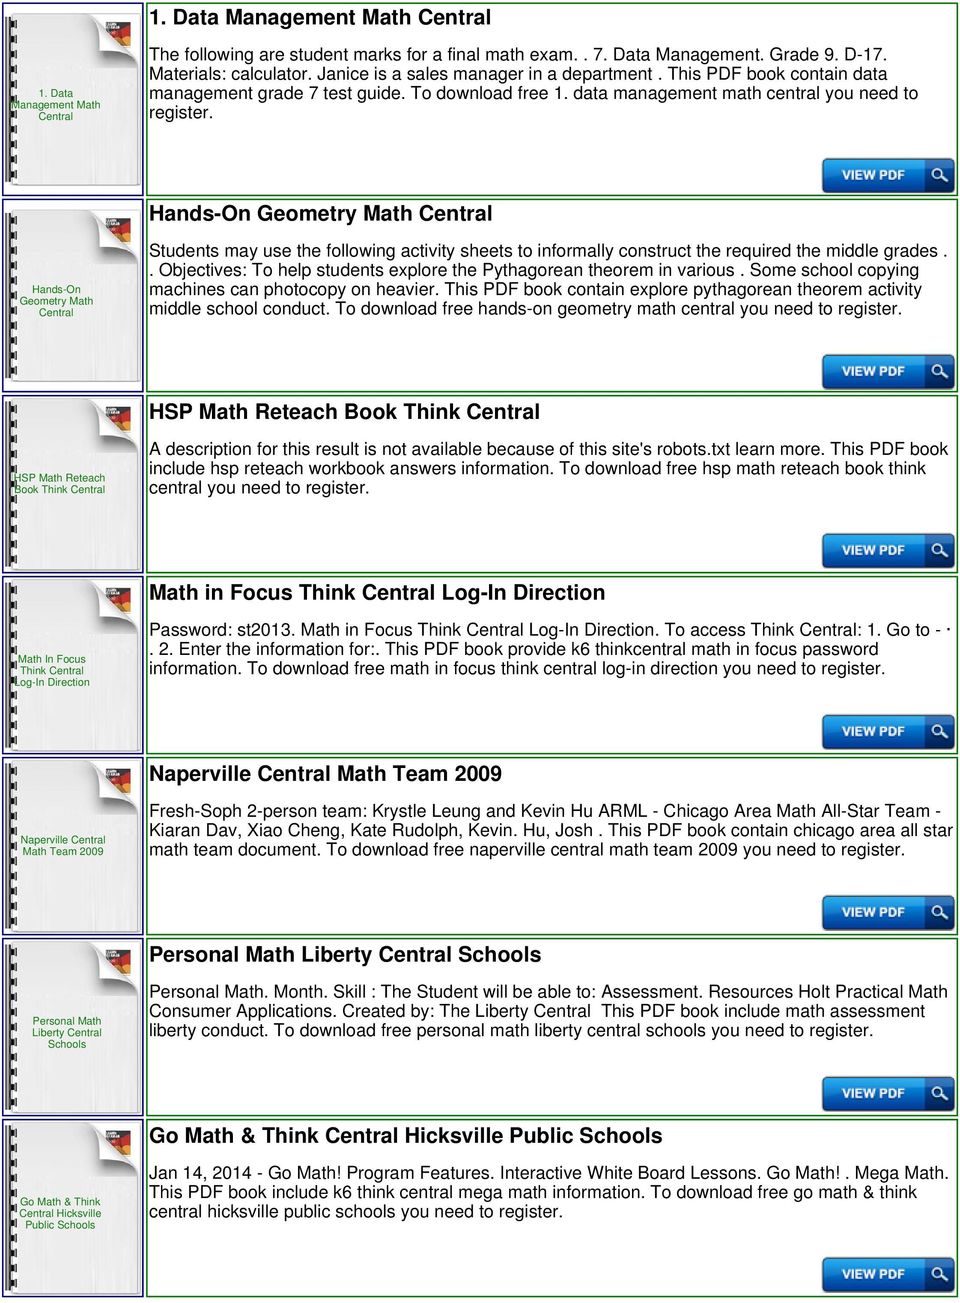 data management math central you need to Hands-On Geometry Math Hands-On Geometry Math Students may use the following activity sheets to informally construct the required the middle grades.